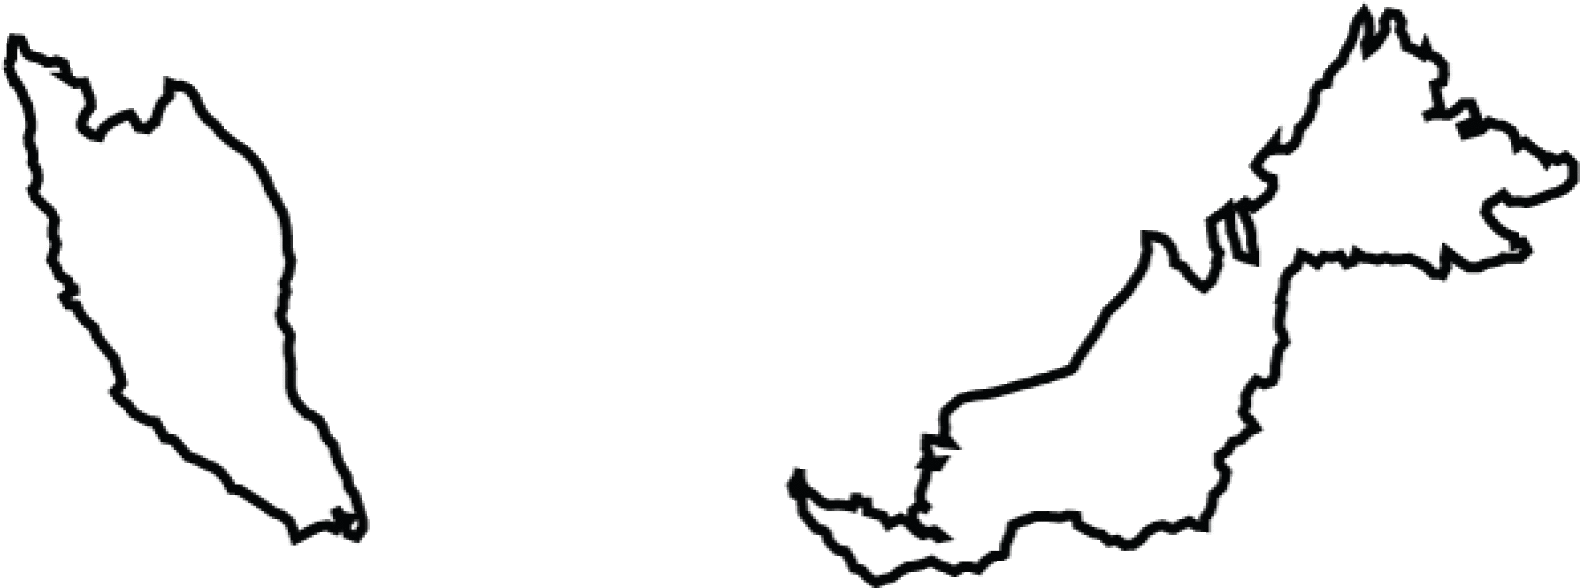 Outline Mapof Malaysia PNG image